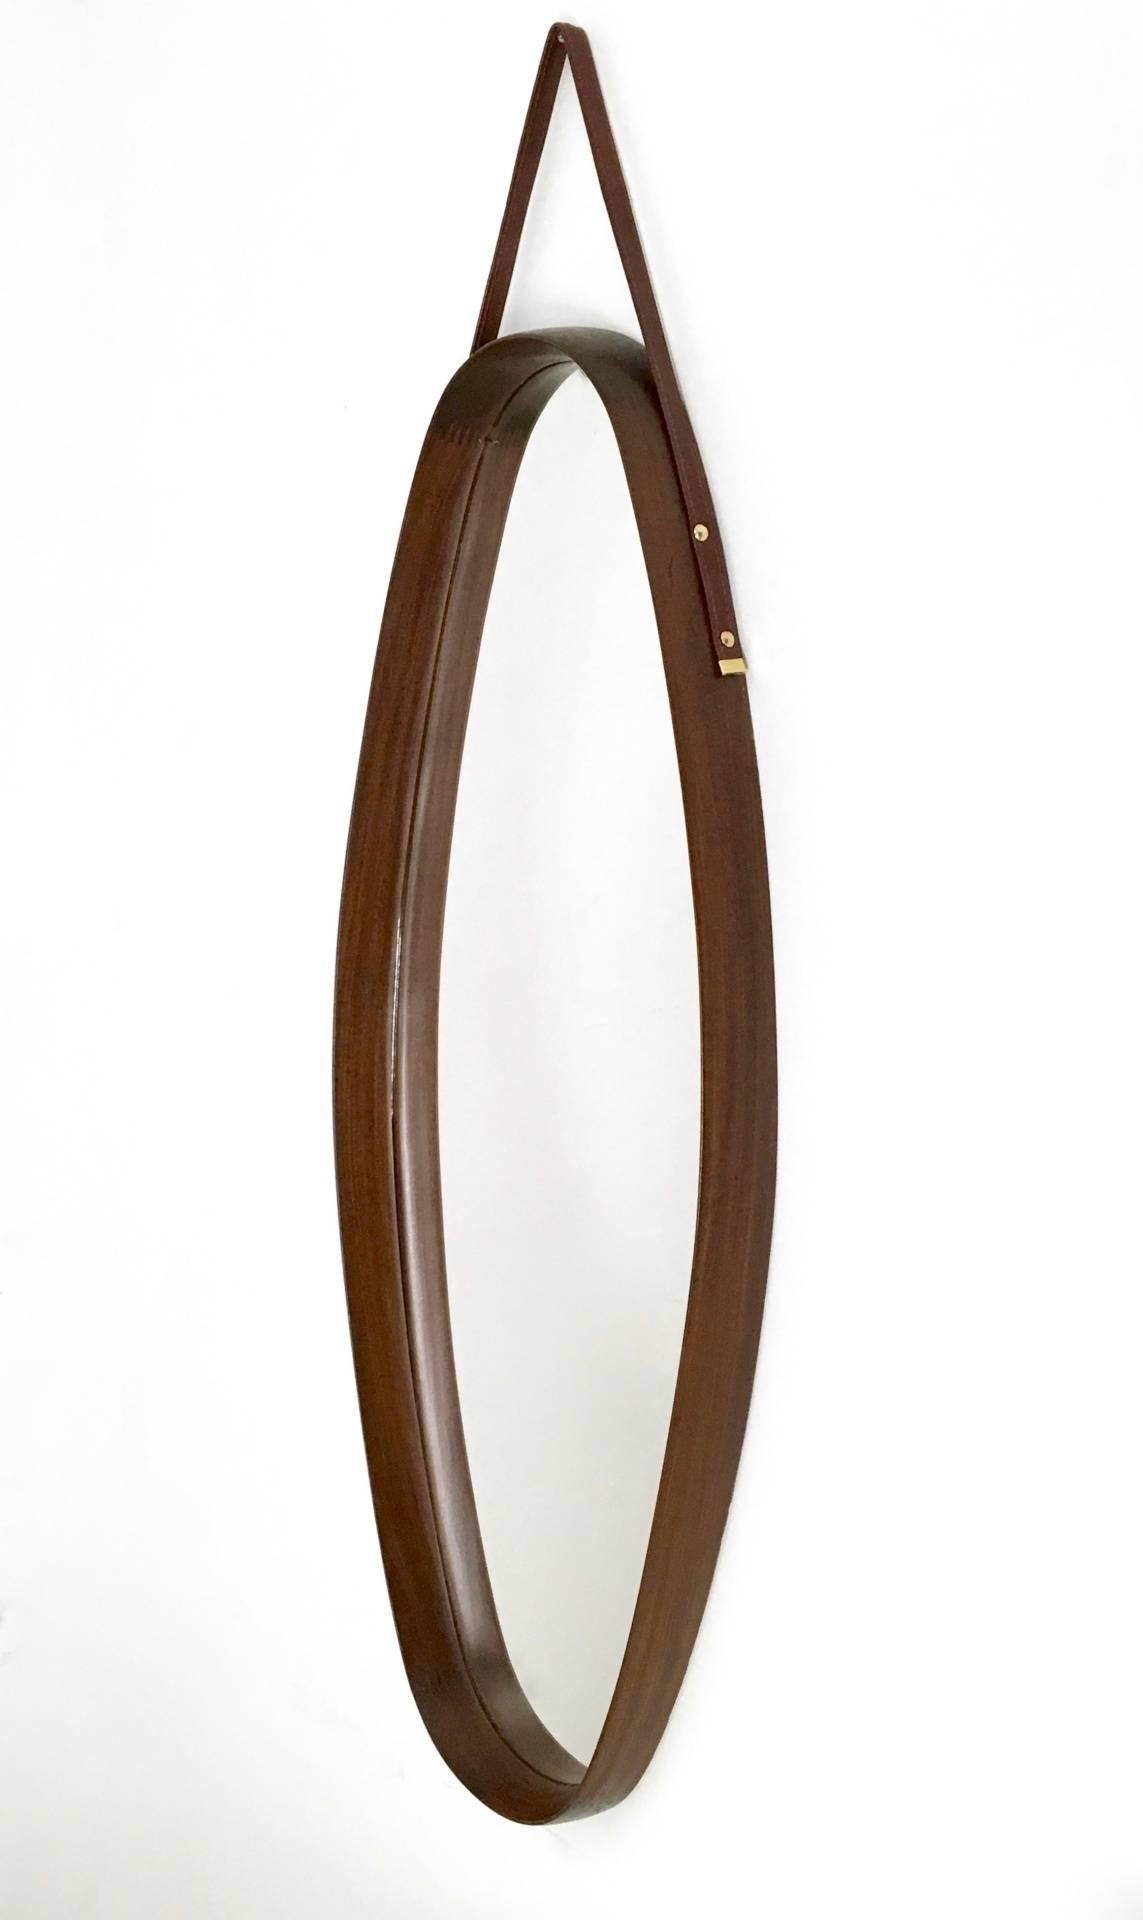 Made in brass, solid mahogany, mirror and leather.
The structure is in wood.
In perfect condition, as we replaced the leather with new one.